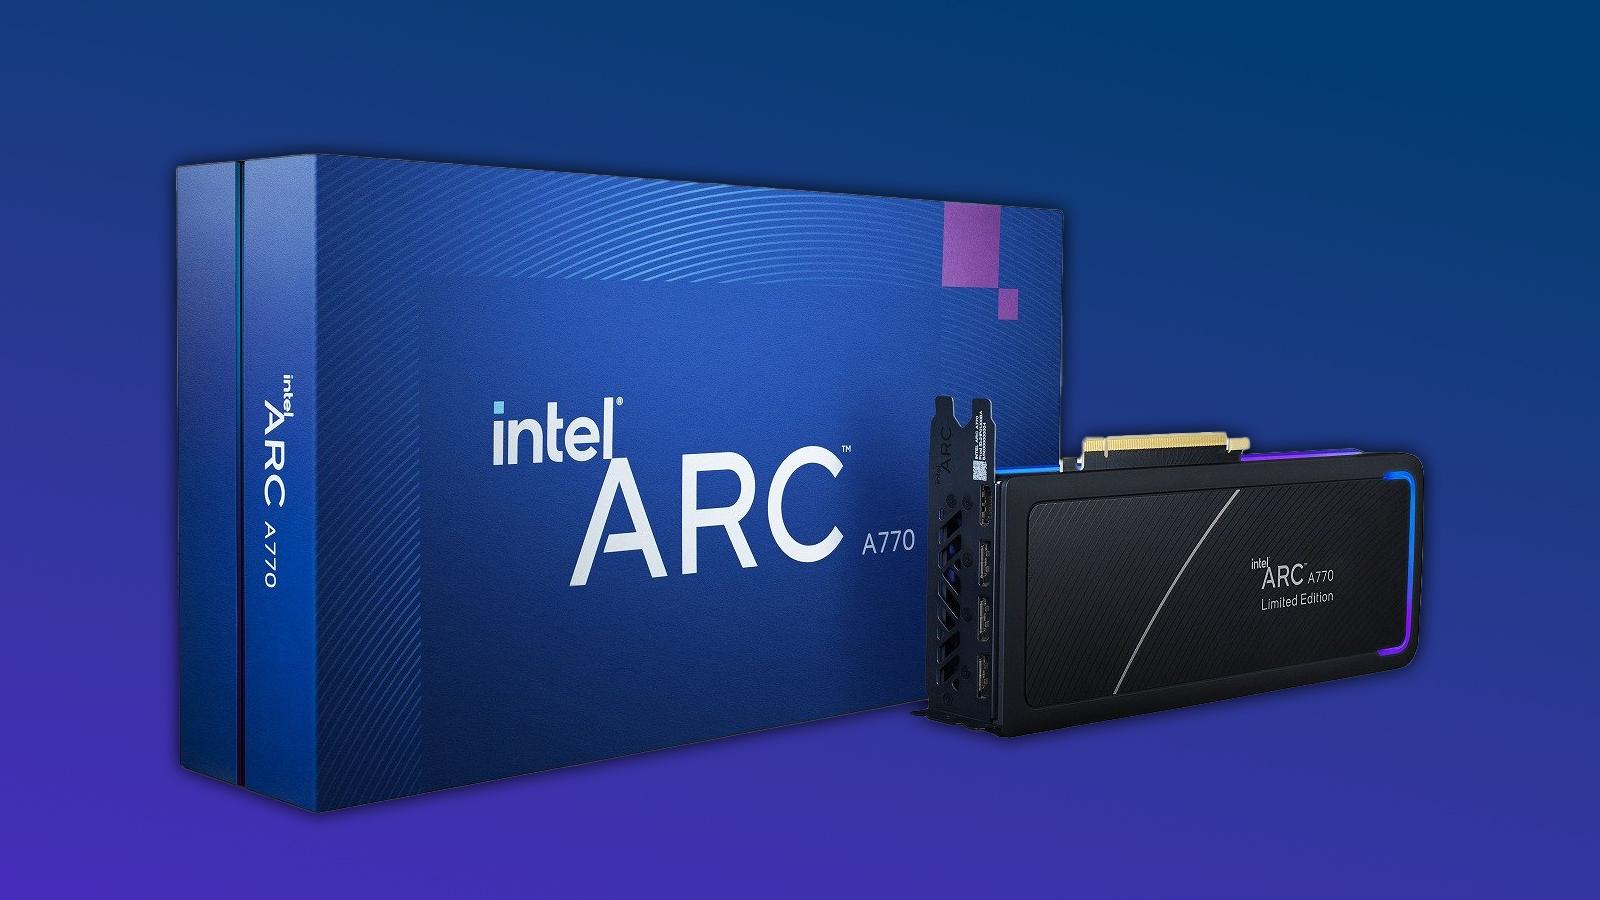 Intel Arc A770 Launching Oct. 12, Starting at $329